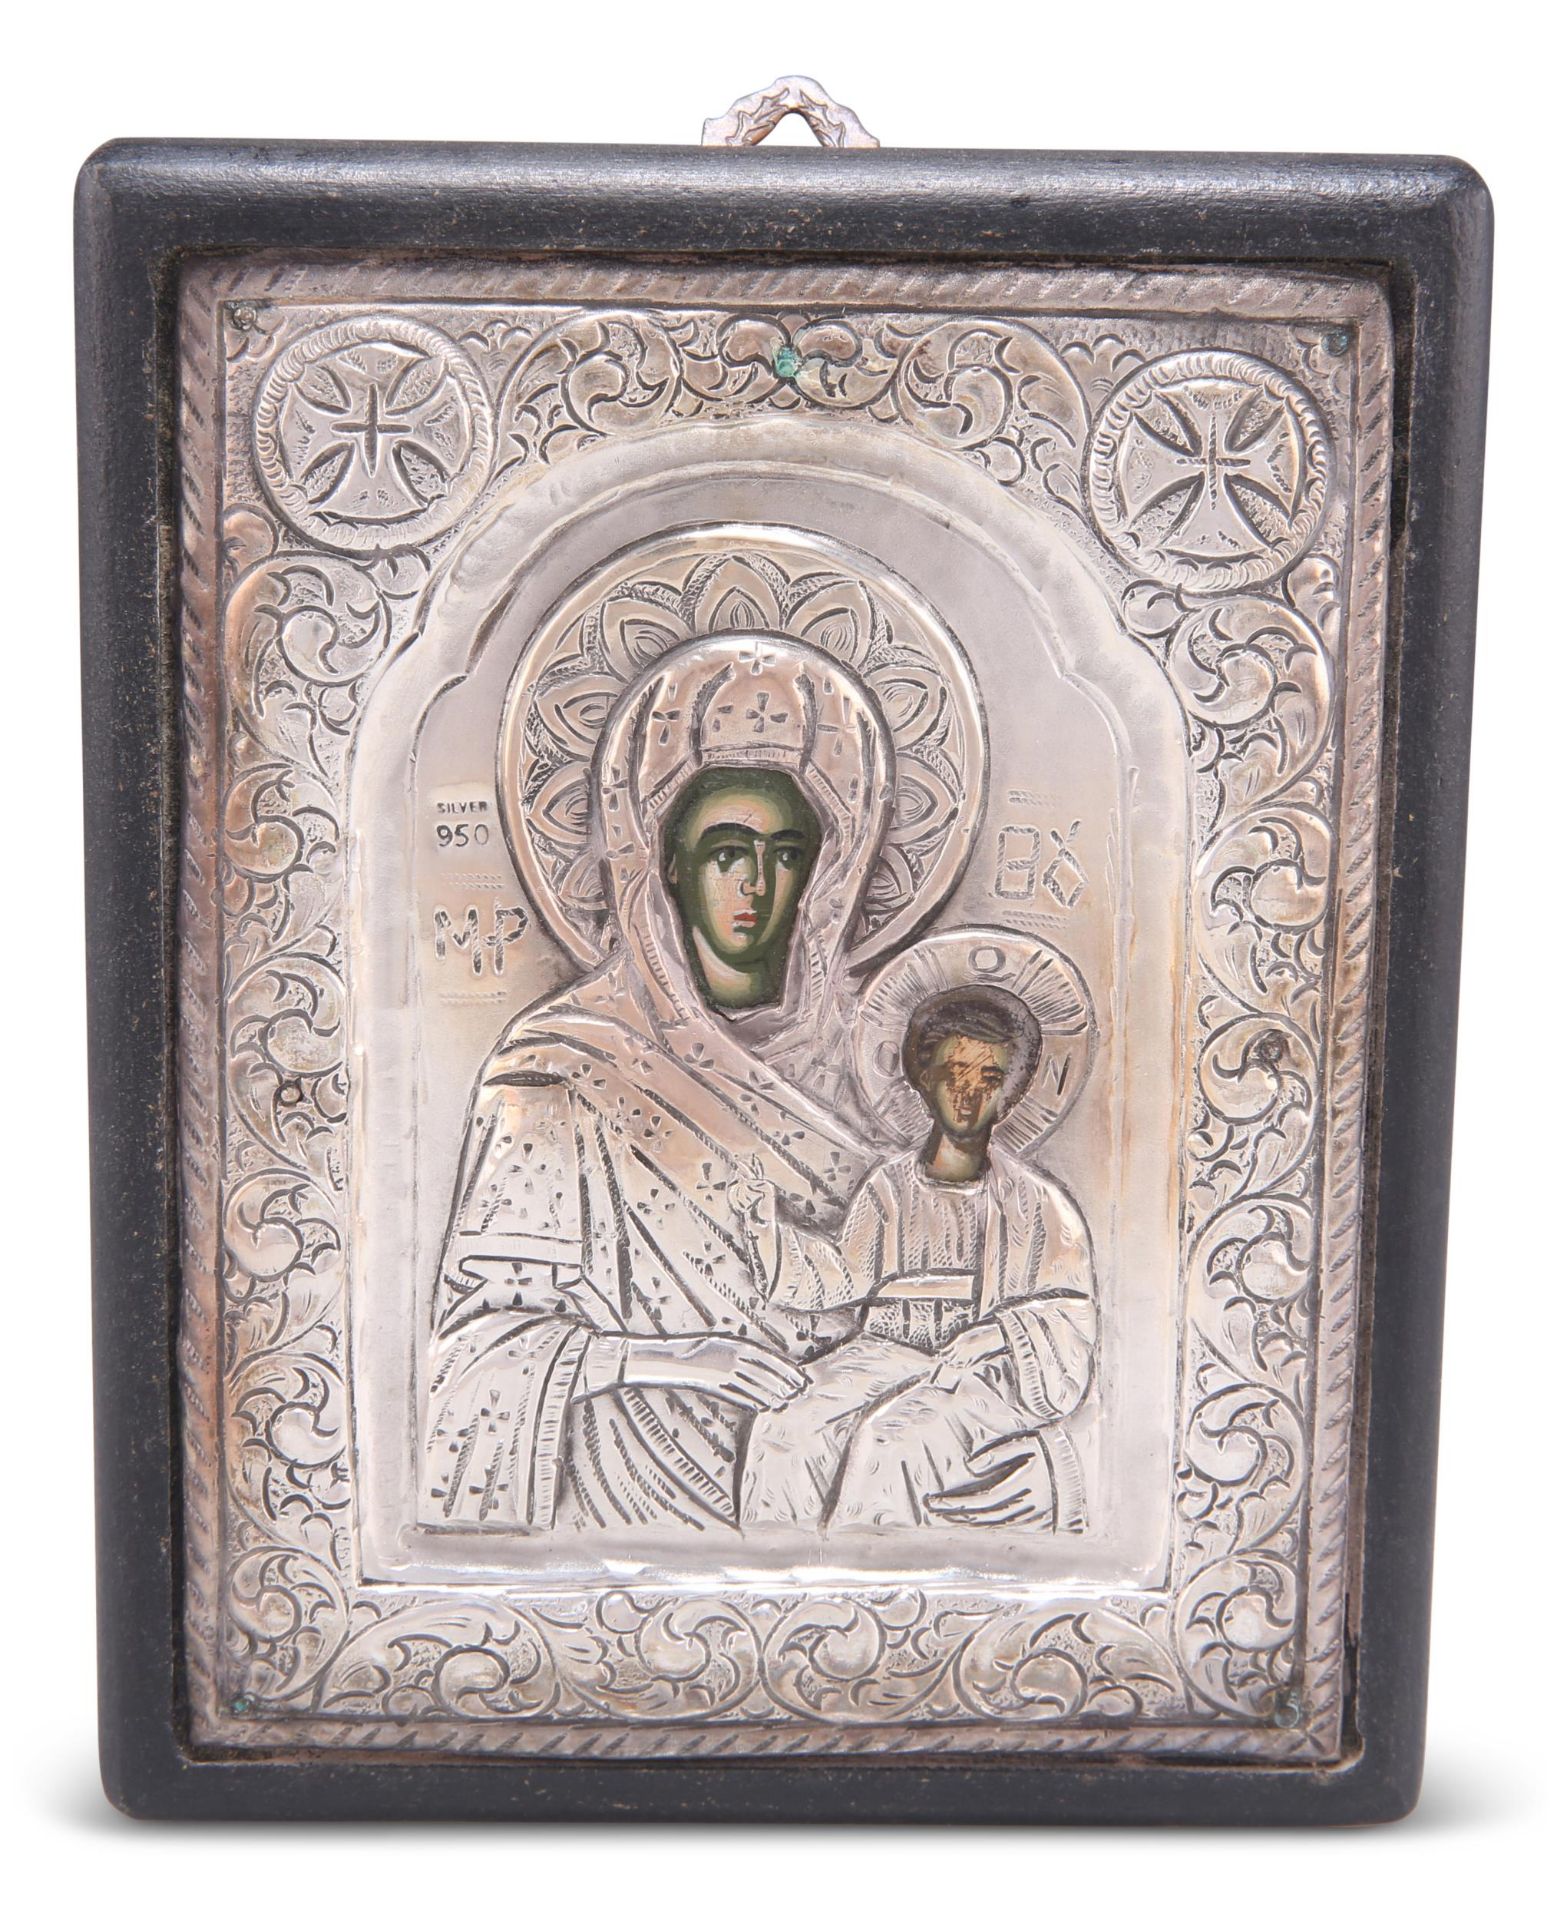 A GREEK SMALL SILVER-MOUNTED ICON